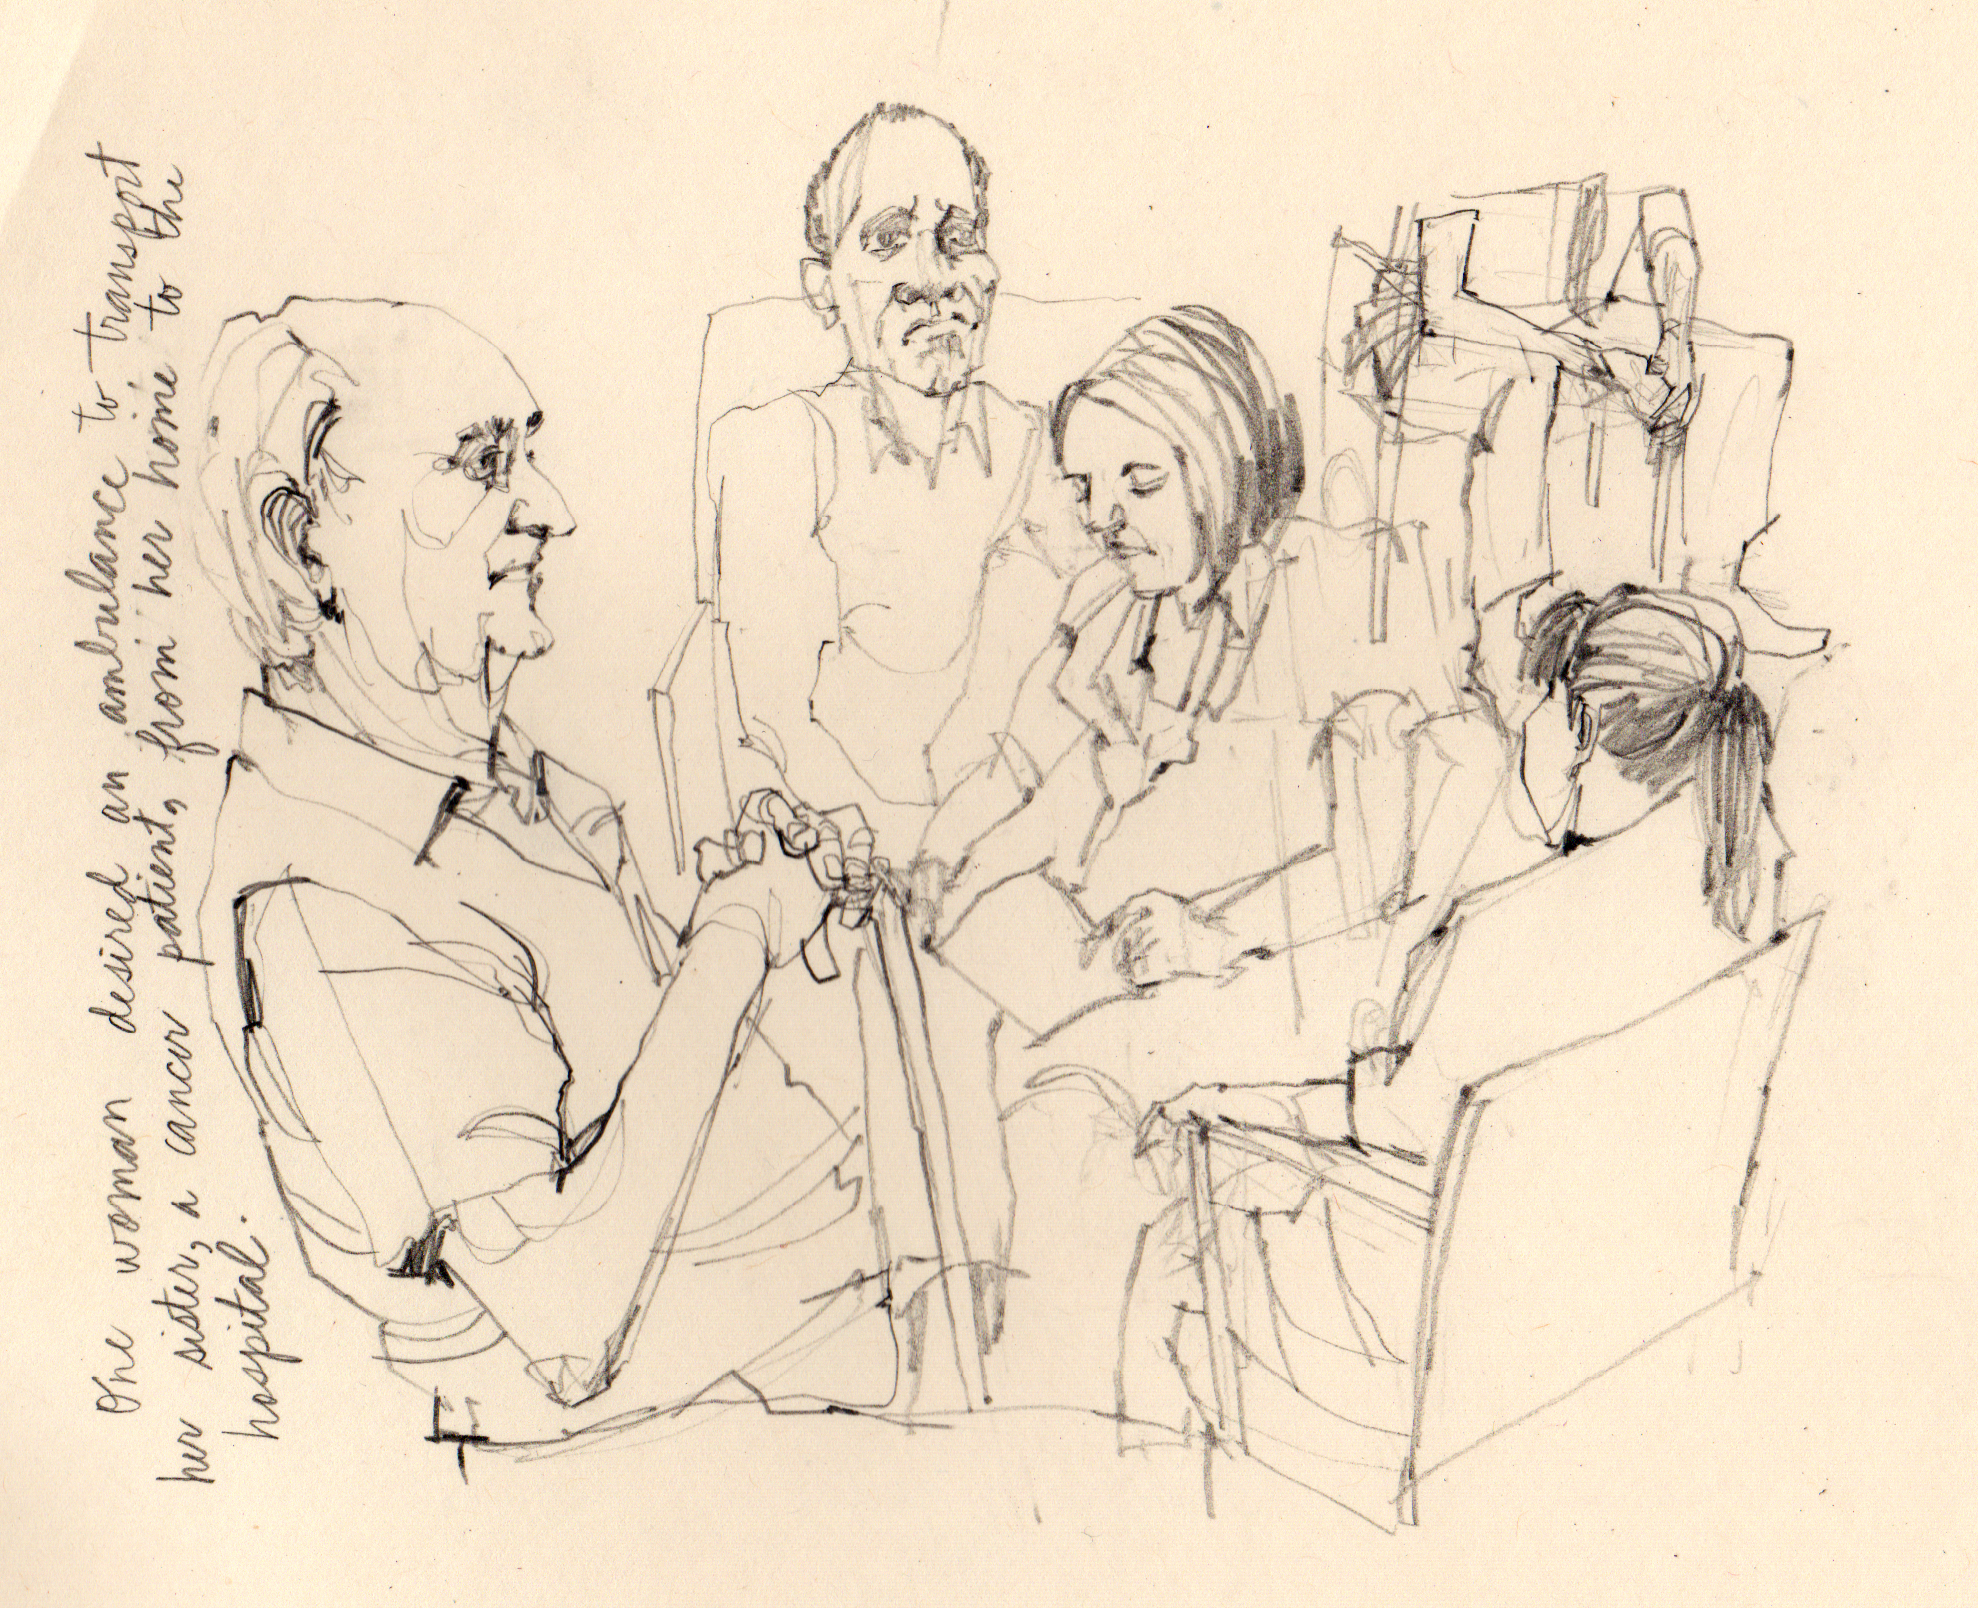  Discarded sketch from an illustration assignment - About the people in waiting rooms of Brazilian politicians 